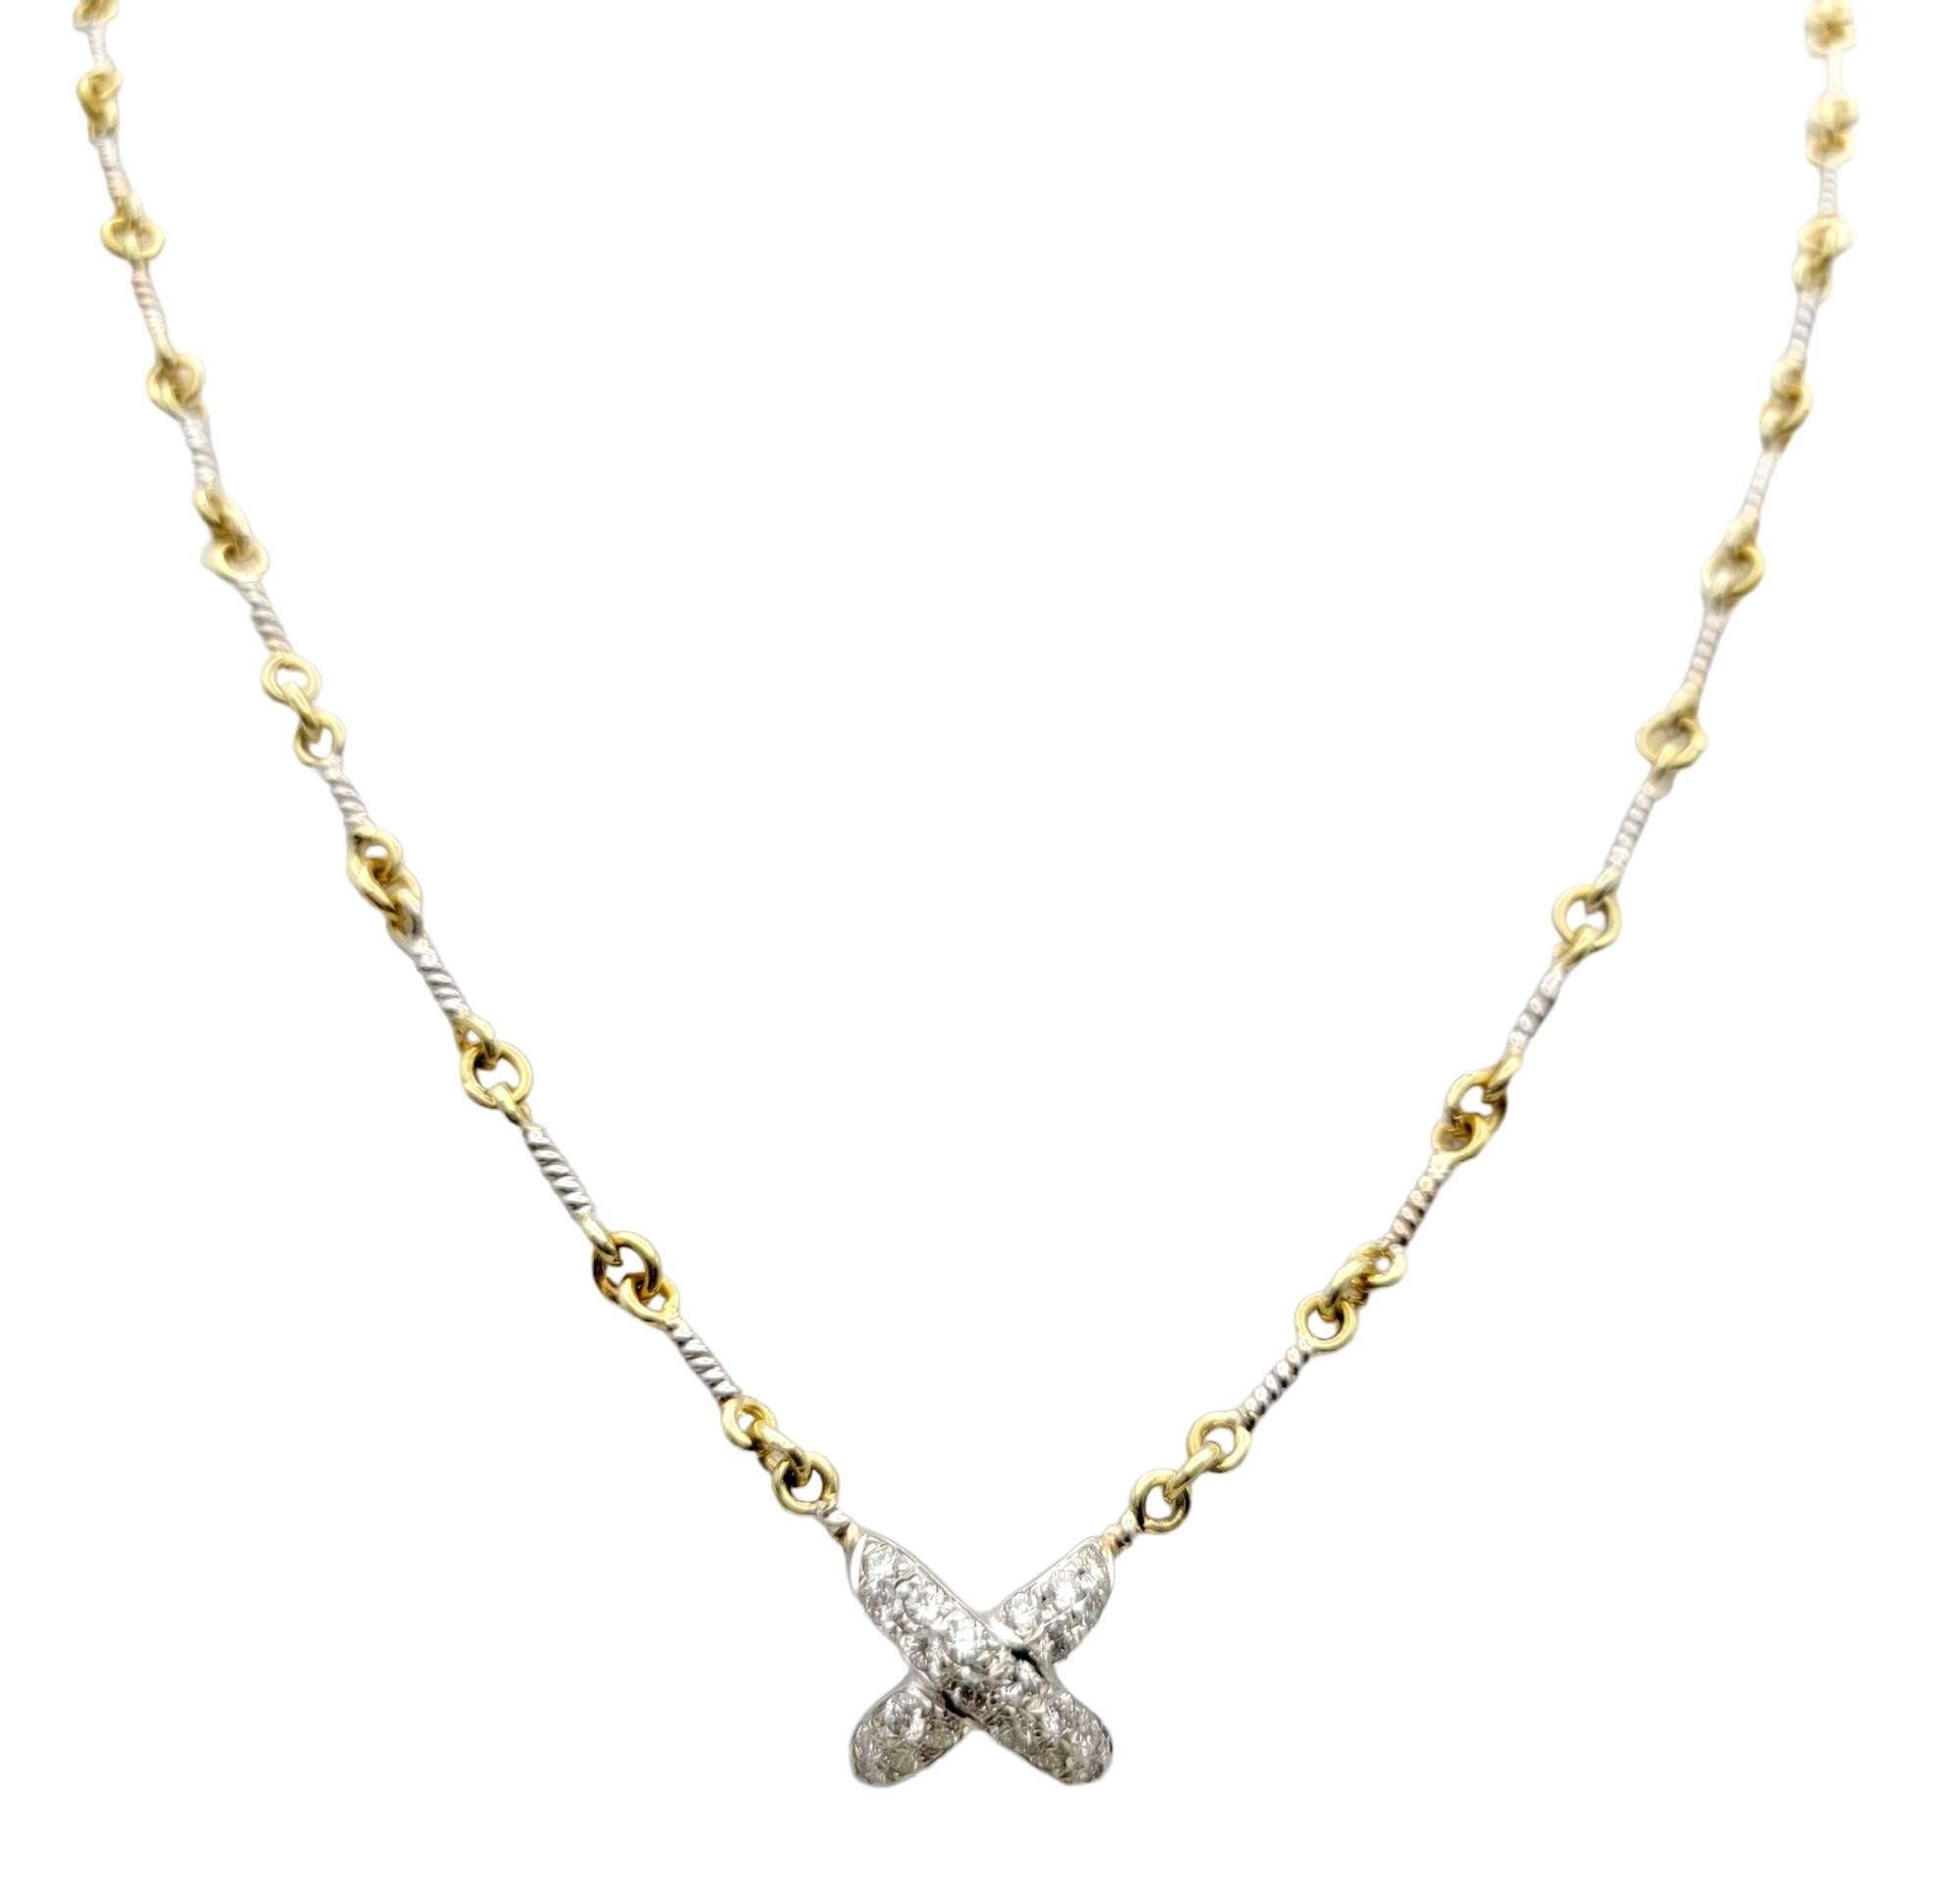 We absolutely love this chic, modern necklace with just a hint of understated sparkle. The elegant two tone design allows it to pair beautifully with just about anything.

This piece features an 18 karat gold chain in an alternating white and yellow